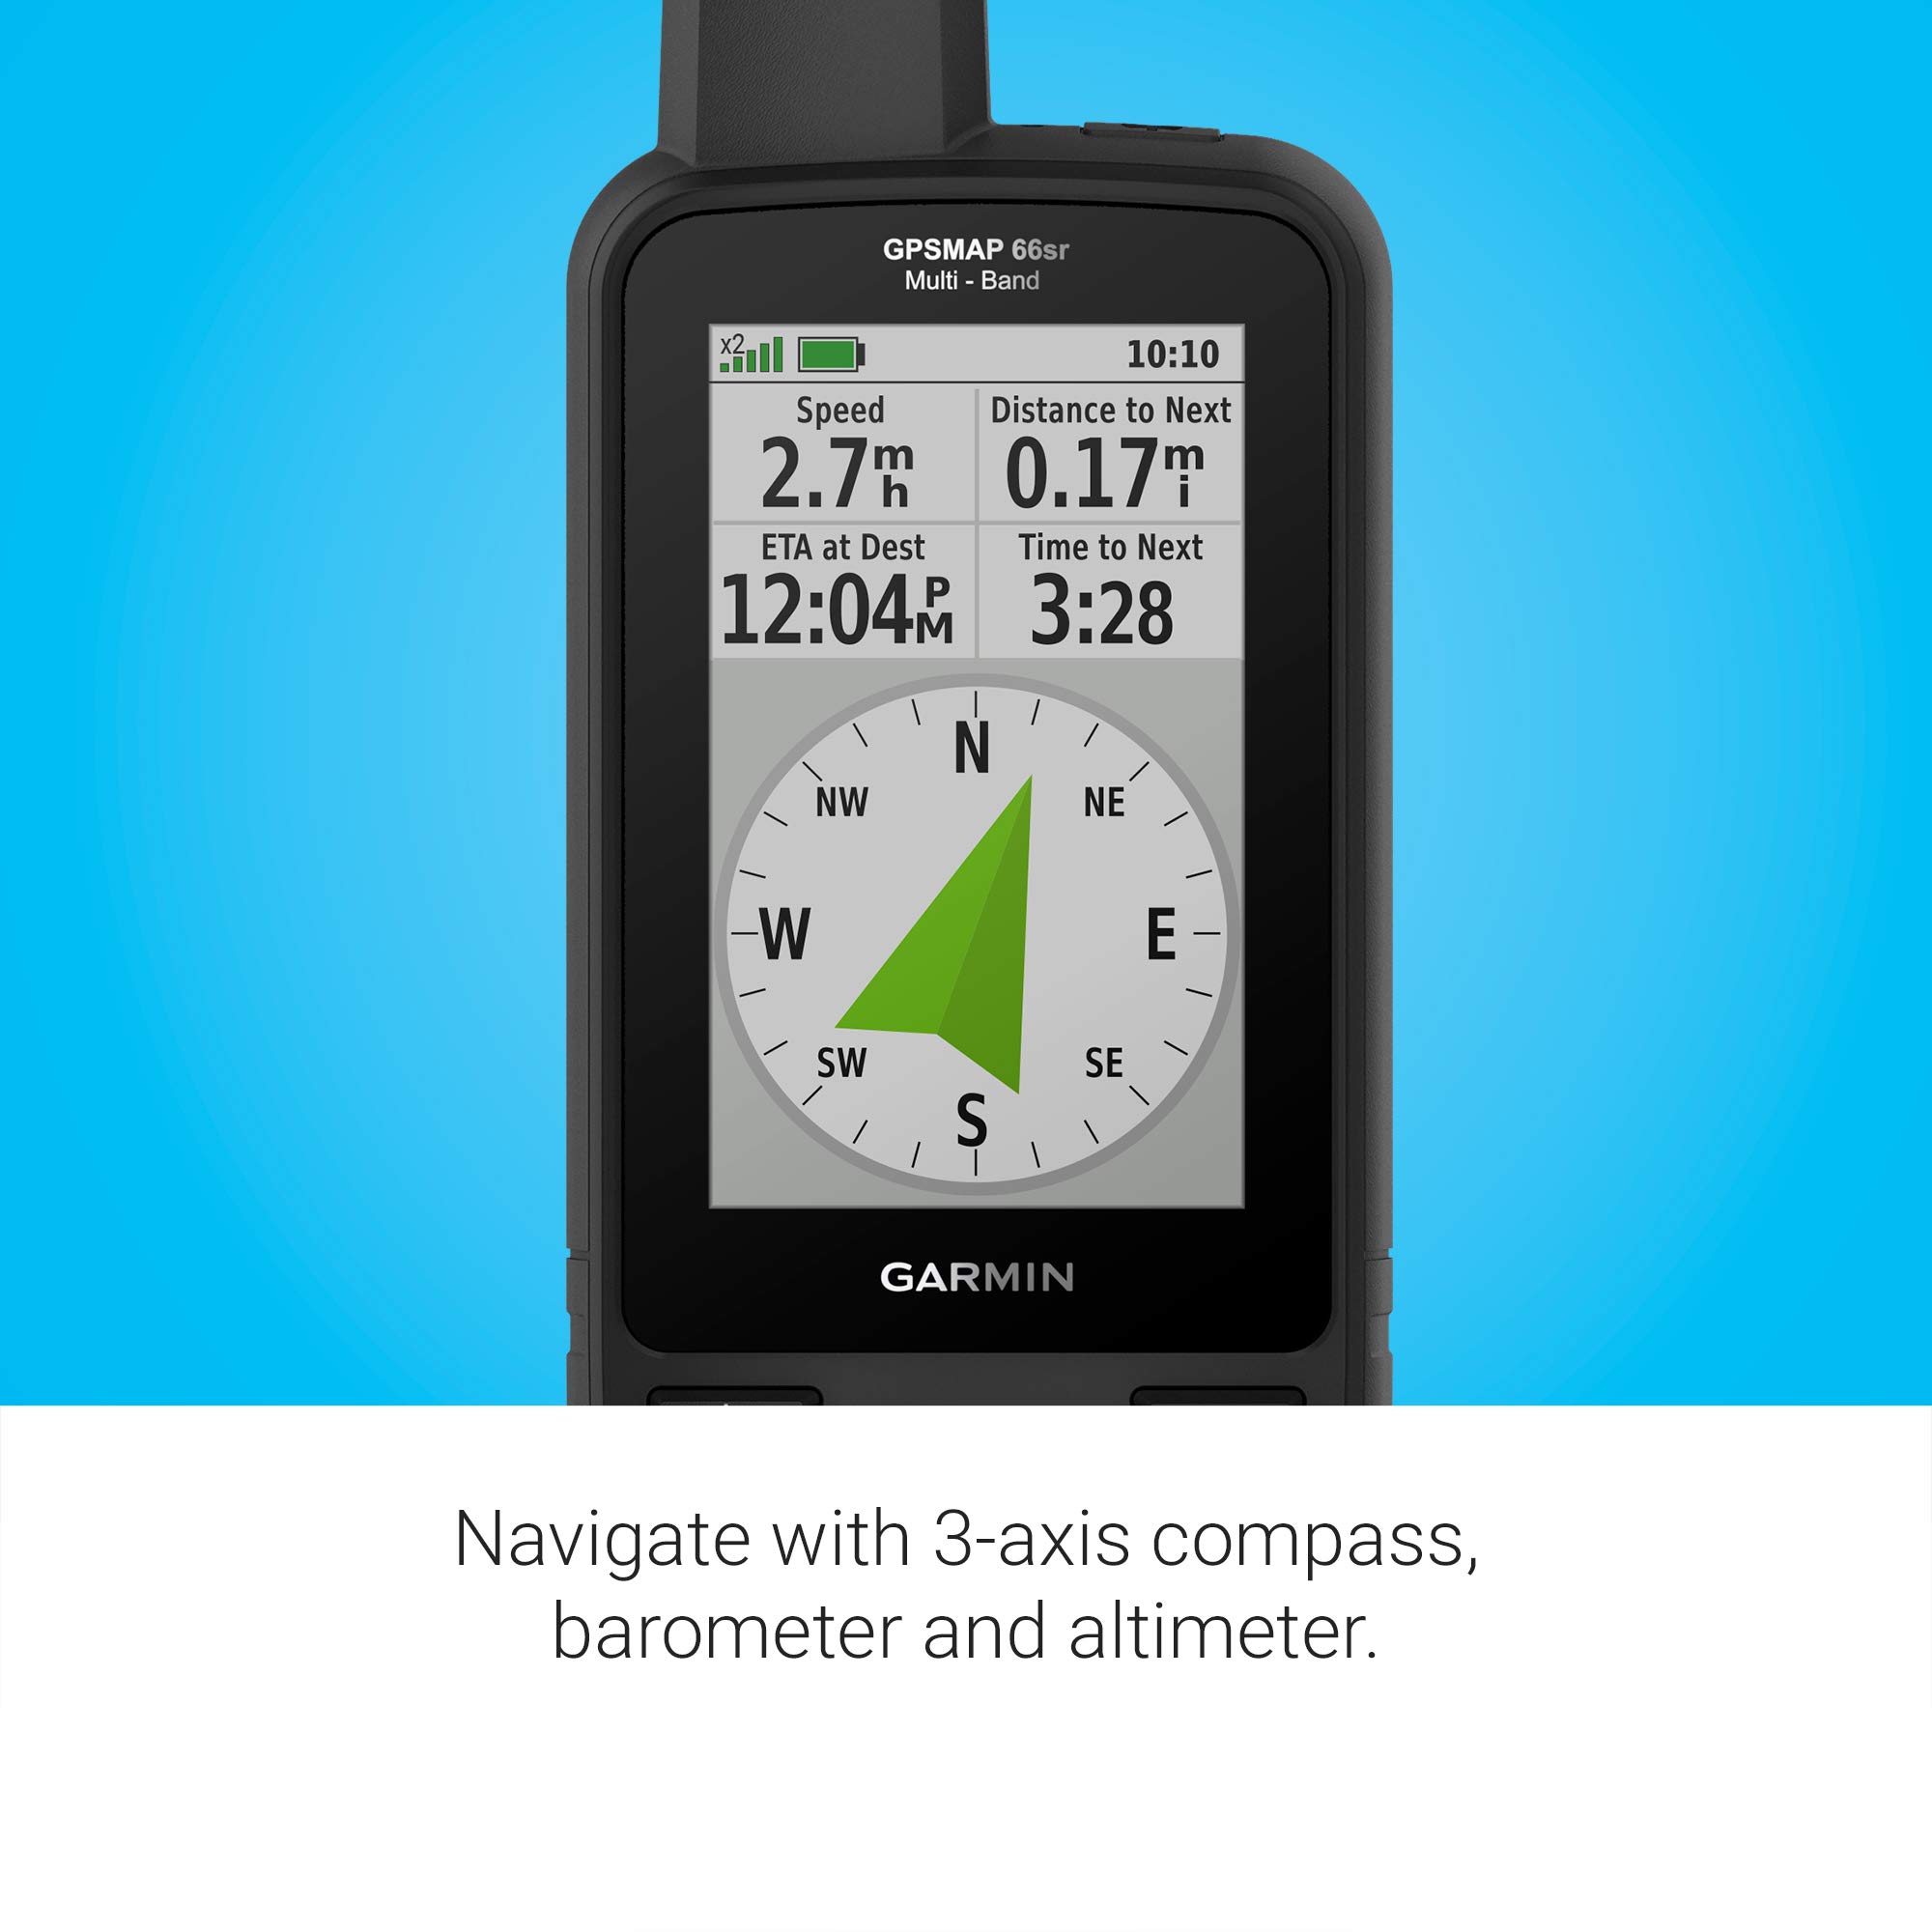 Garmin GPSMAP 66sr, Hiking Handheld with Expanded GNSS and Multi-Band TechnologyHandheld, 3